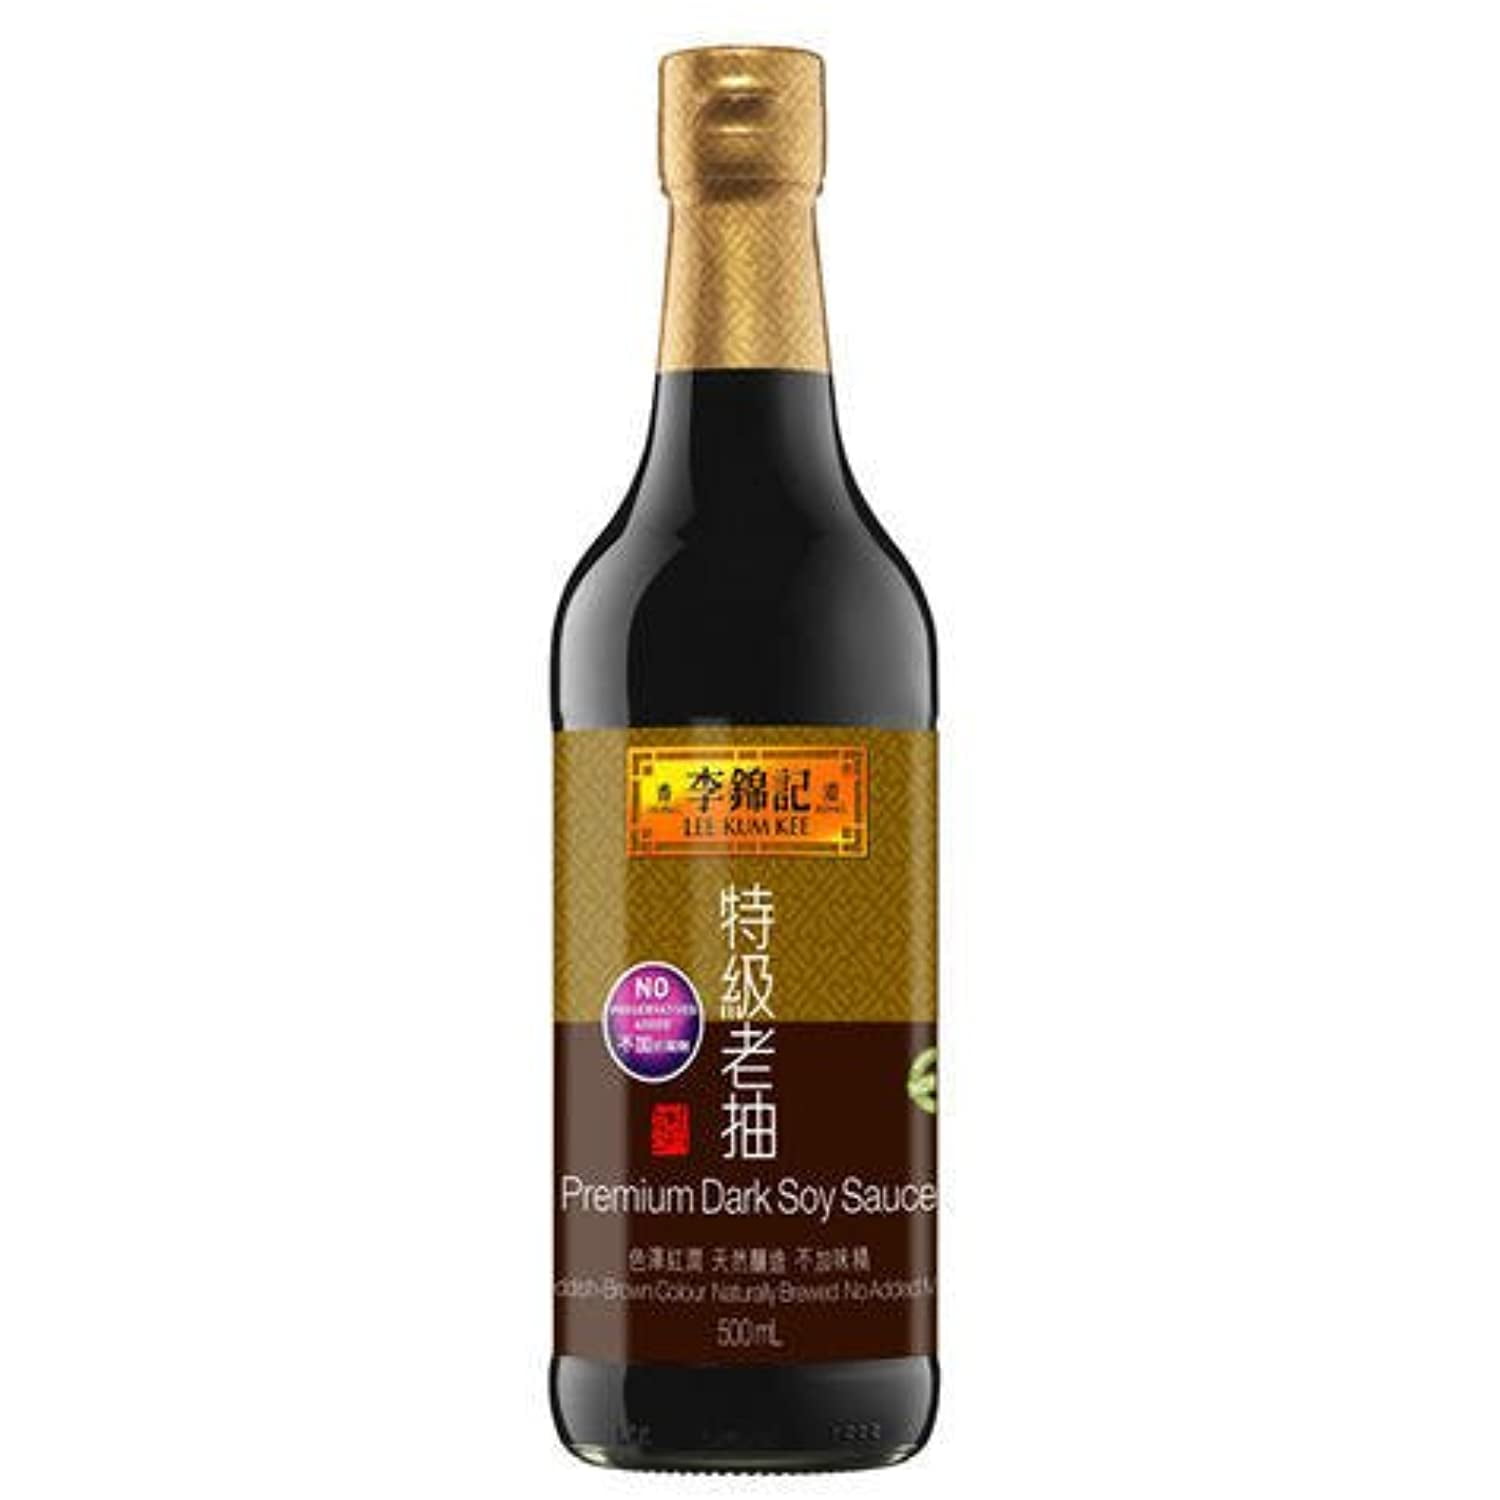 Lee Kum Kee Premium Soy Sauce, 16.9-Ounce Bottle (Pack of 2)